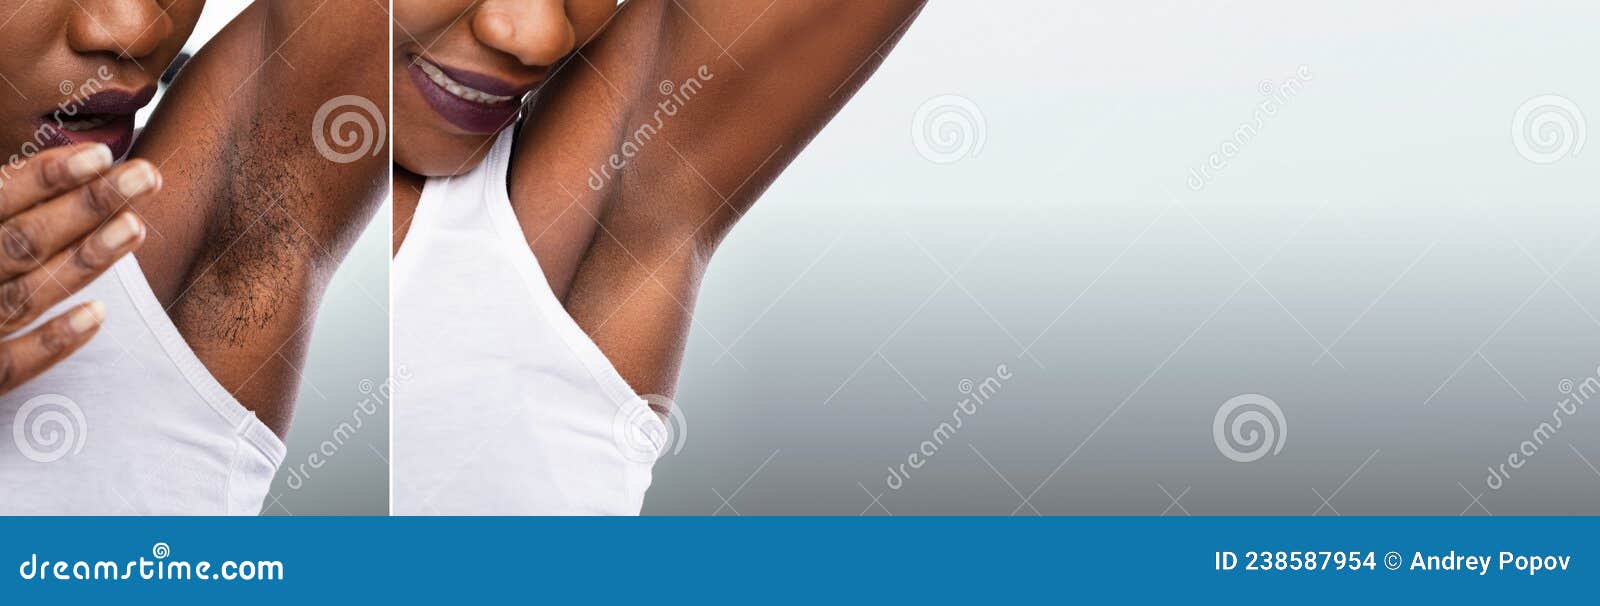 before and after concept of woman's underarm hair removal